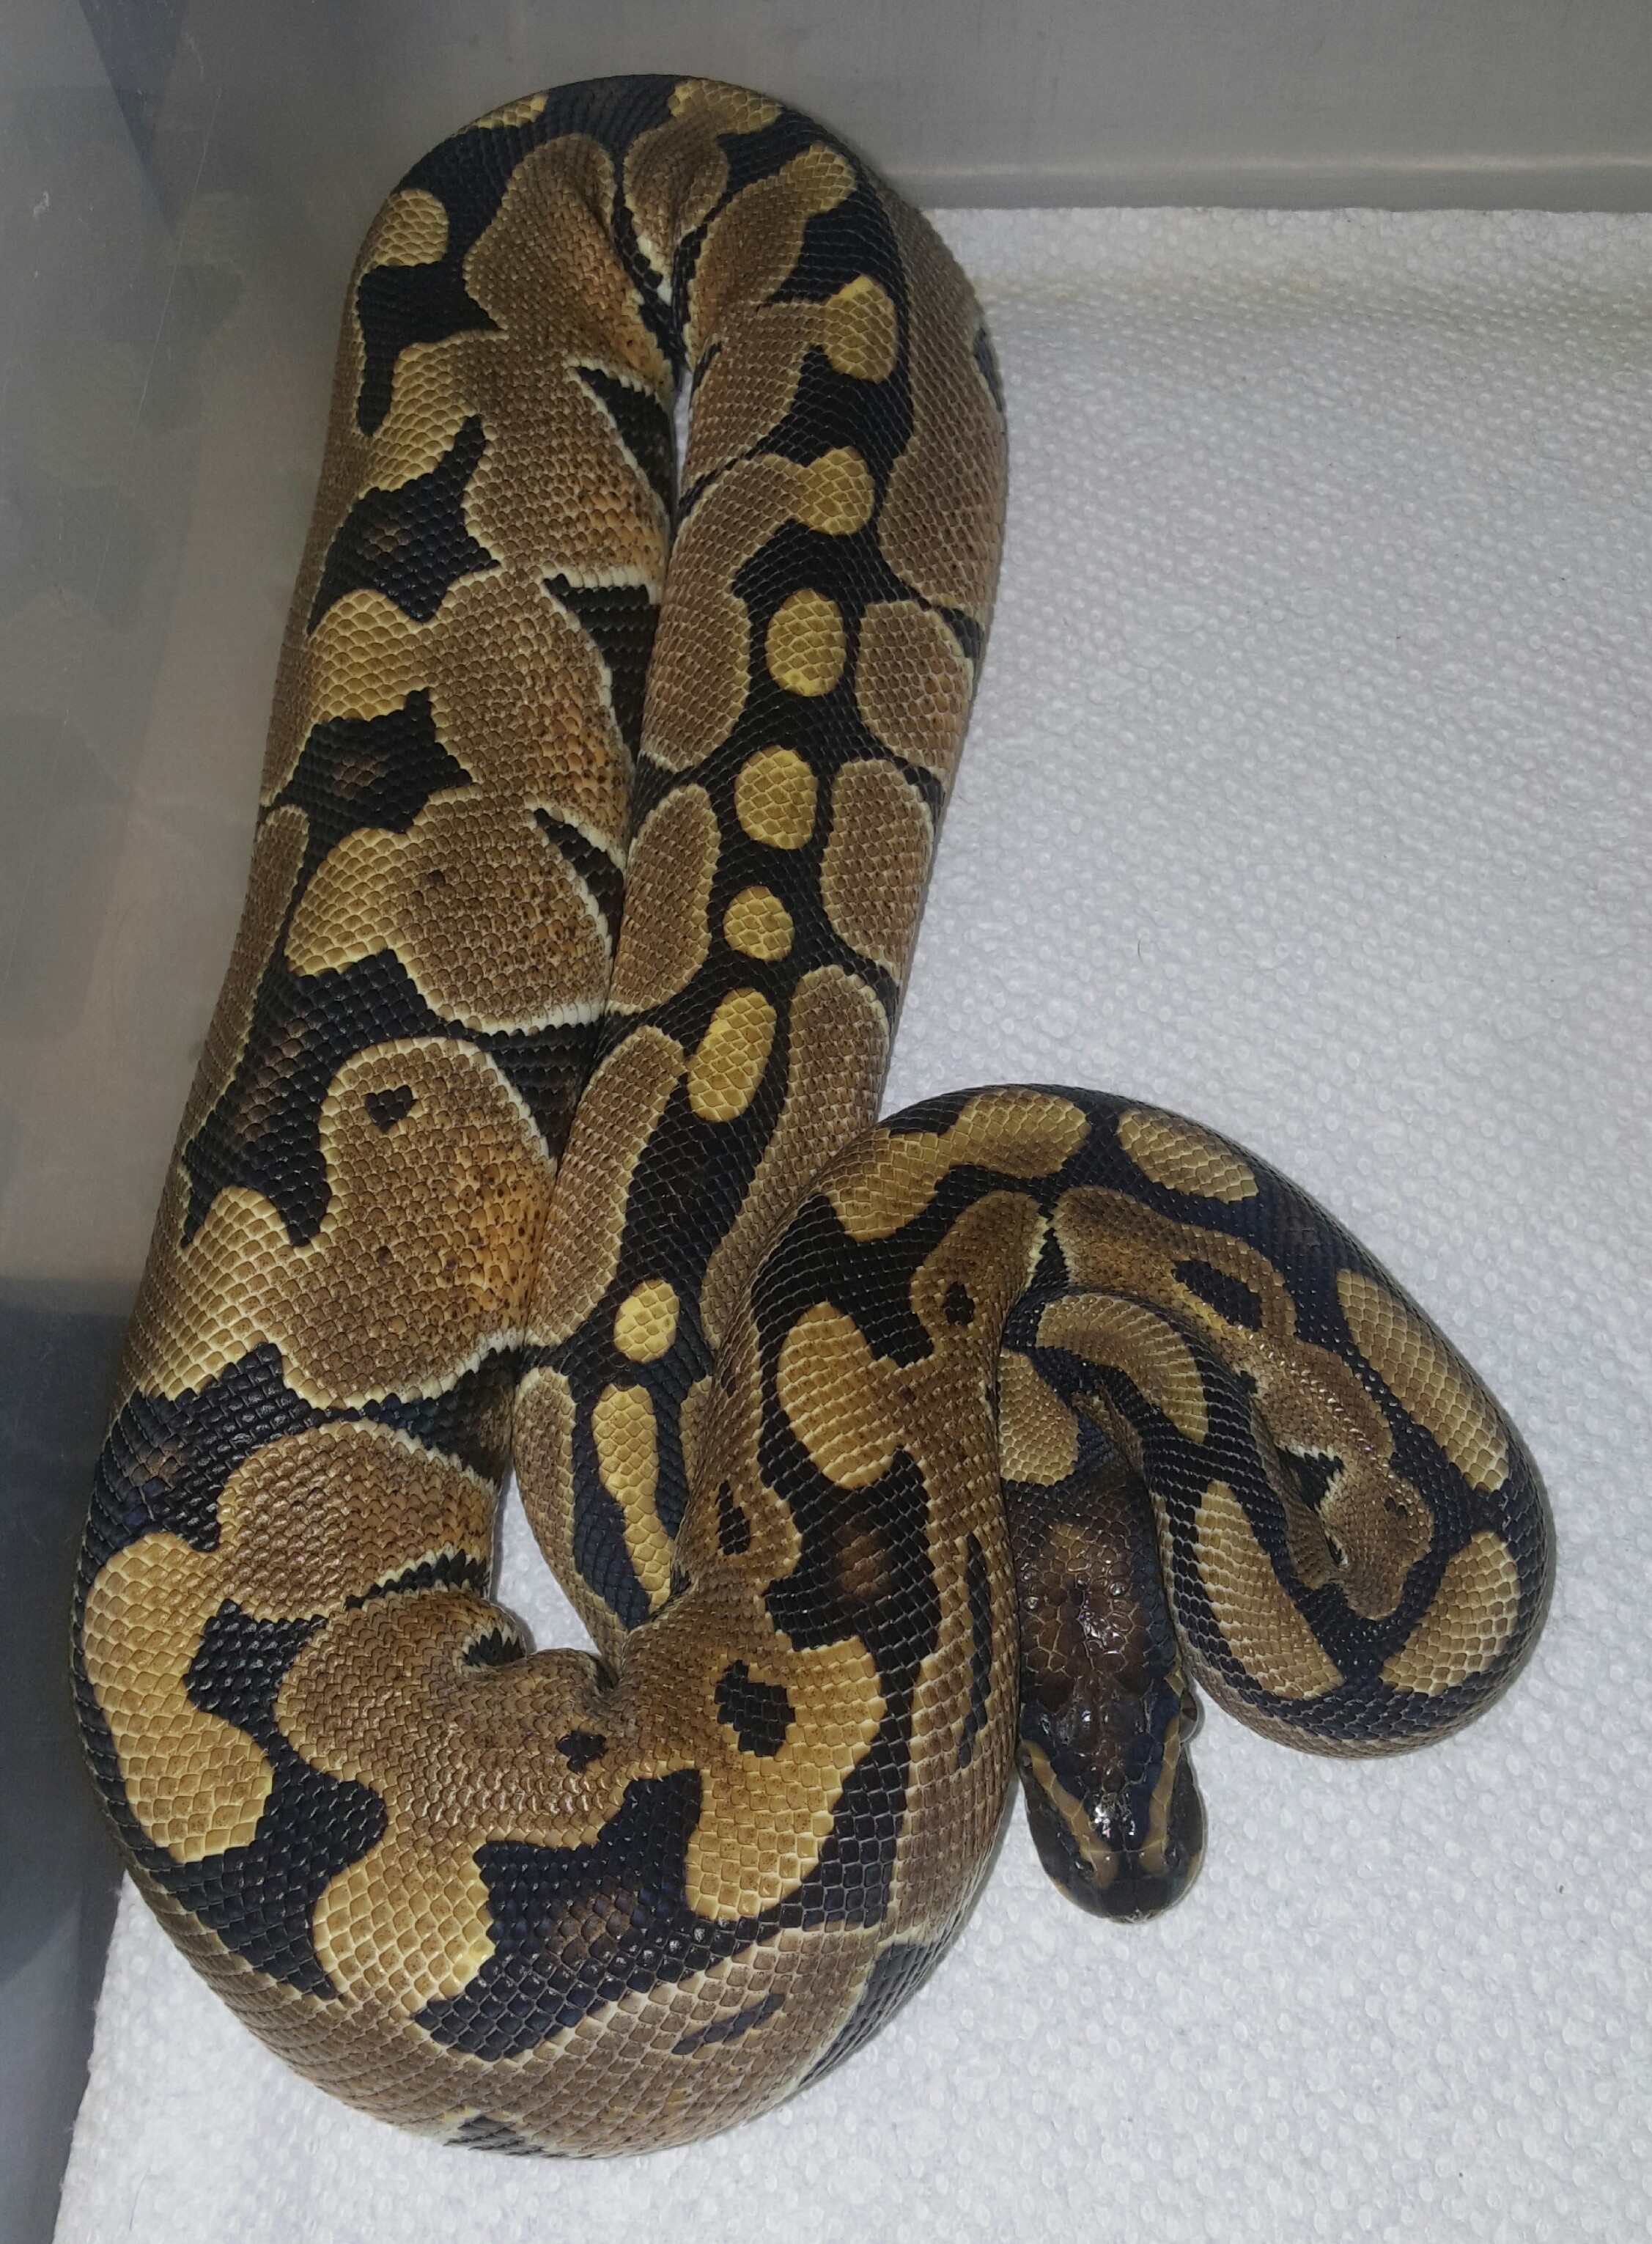 Jungle Woma Ball Python by After dark reptiles